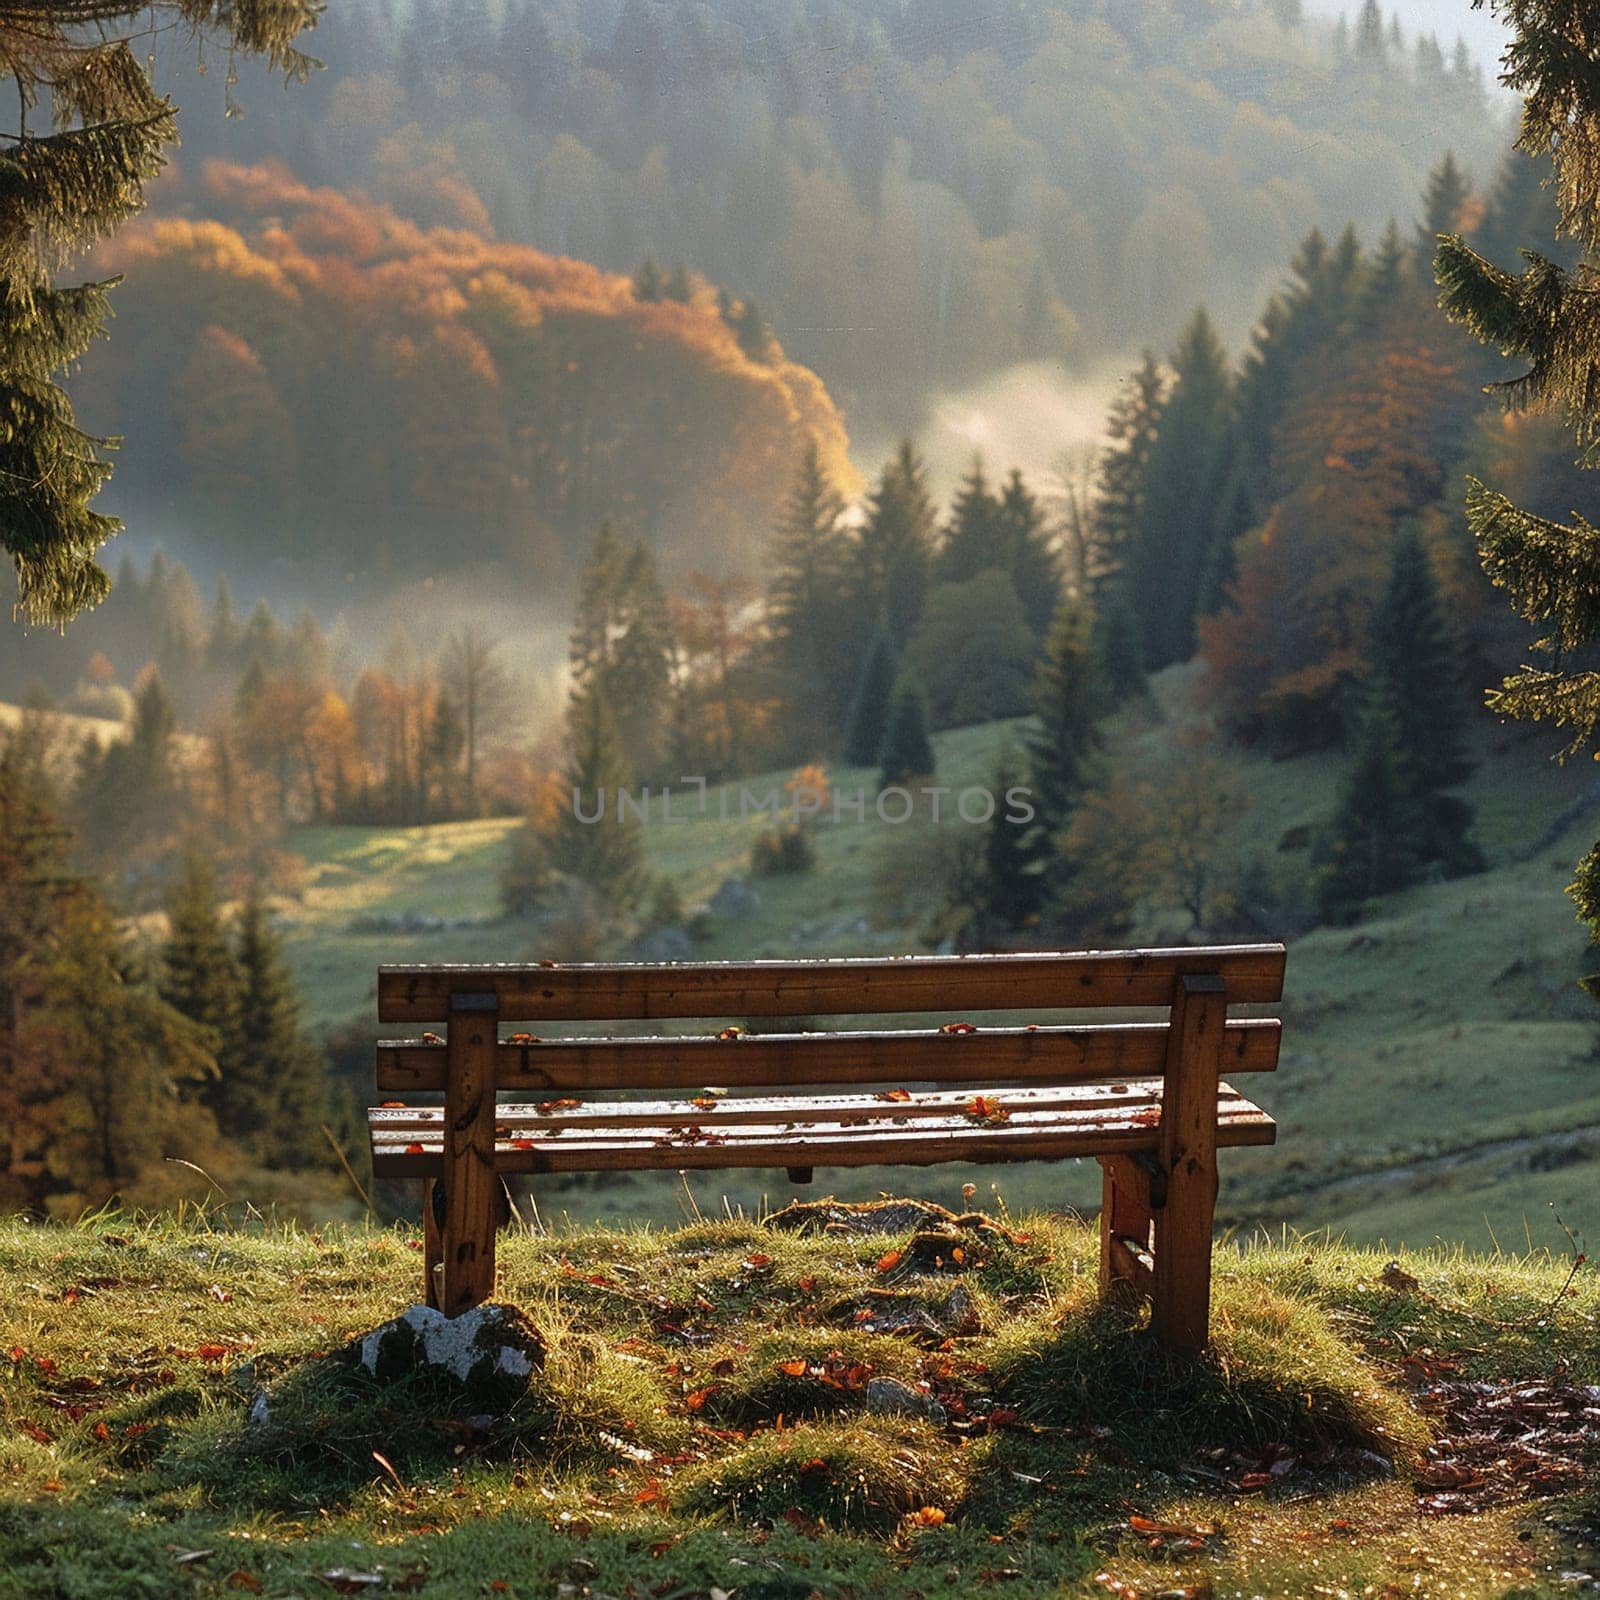 A solitary bench overlooking a scenic vista, inviting contemplation and rest.